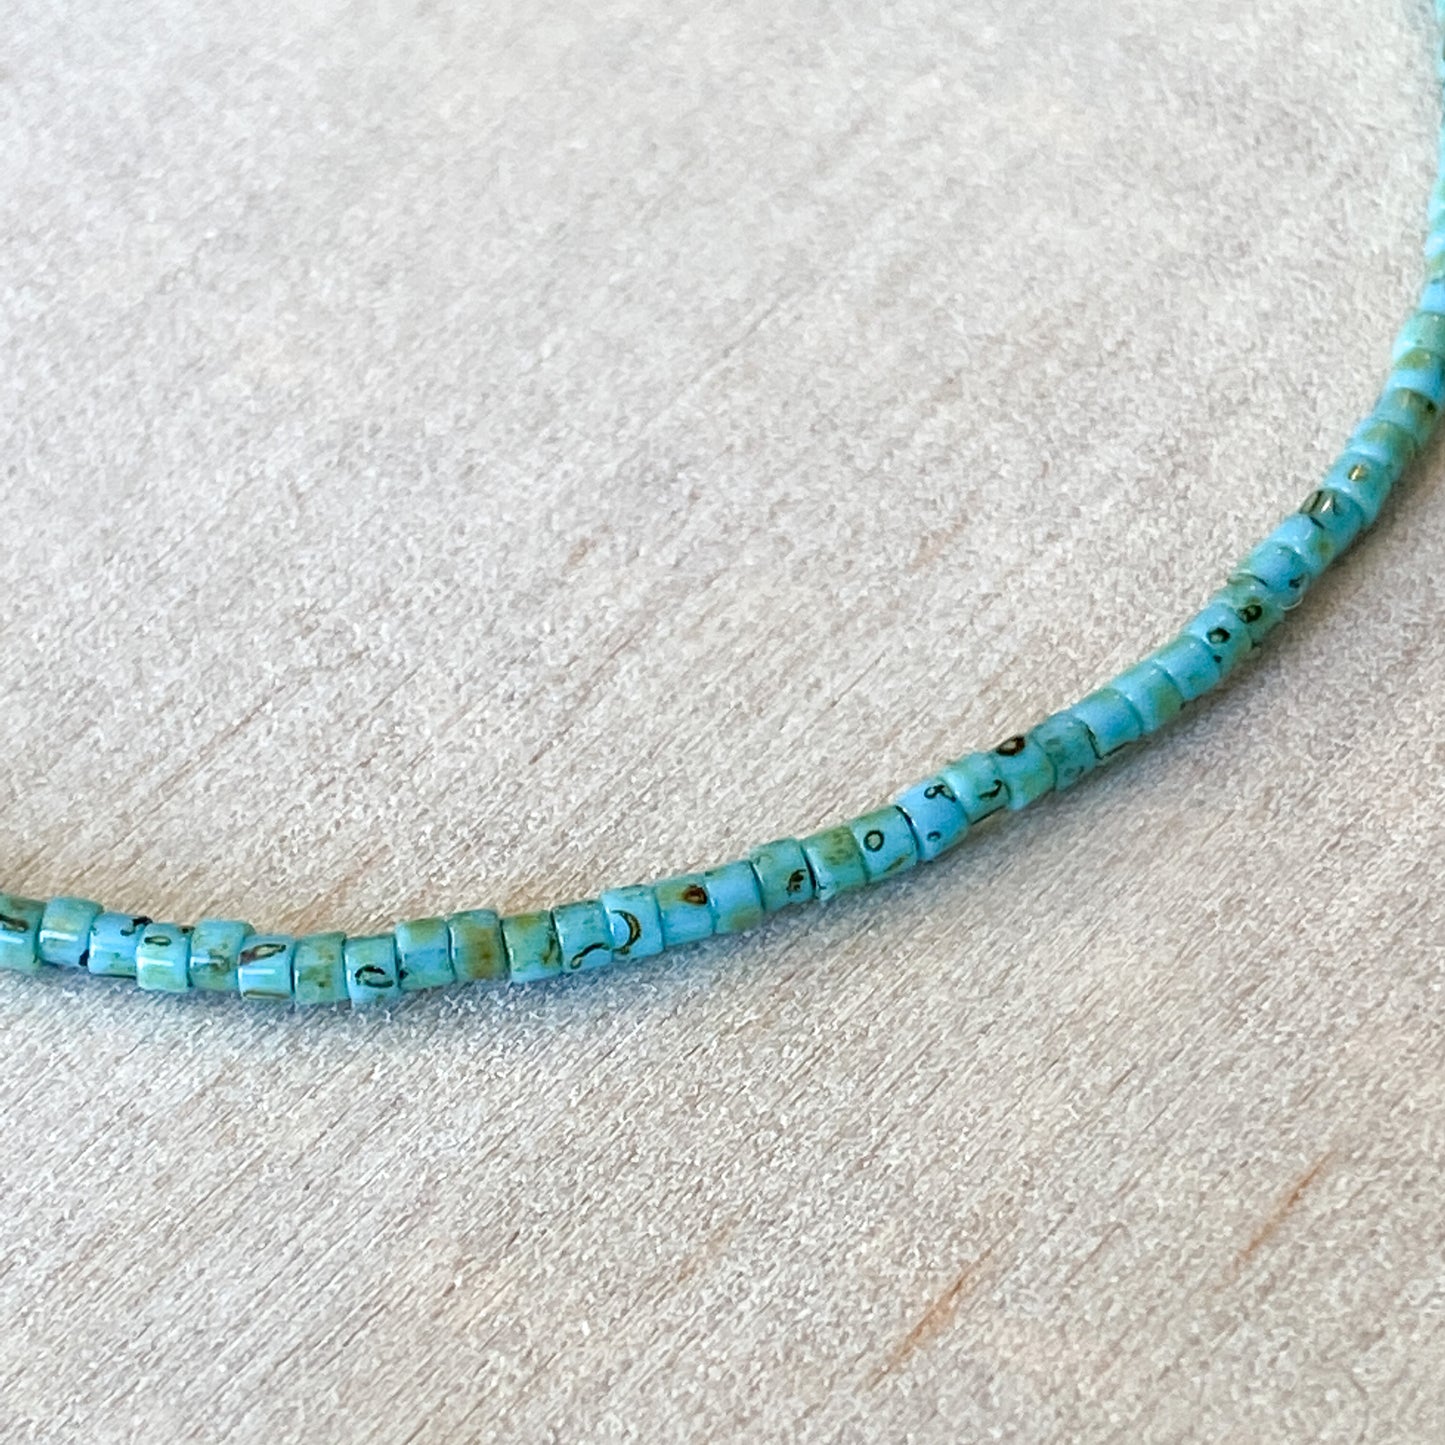 Turquoise - 1.6mm